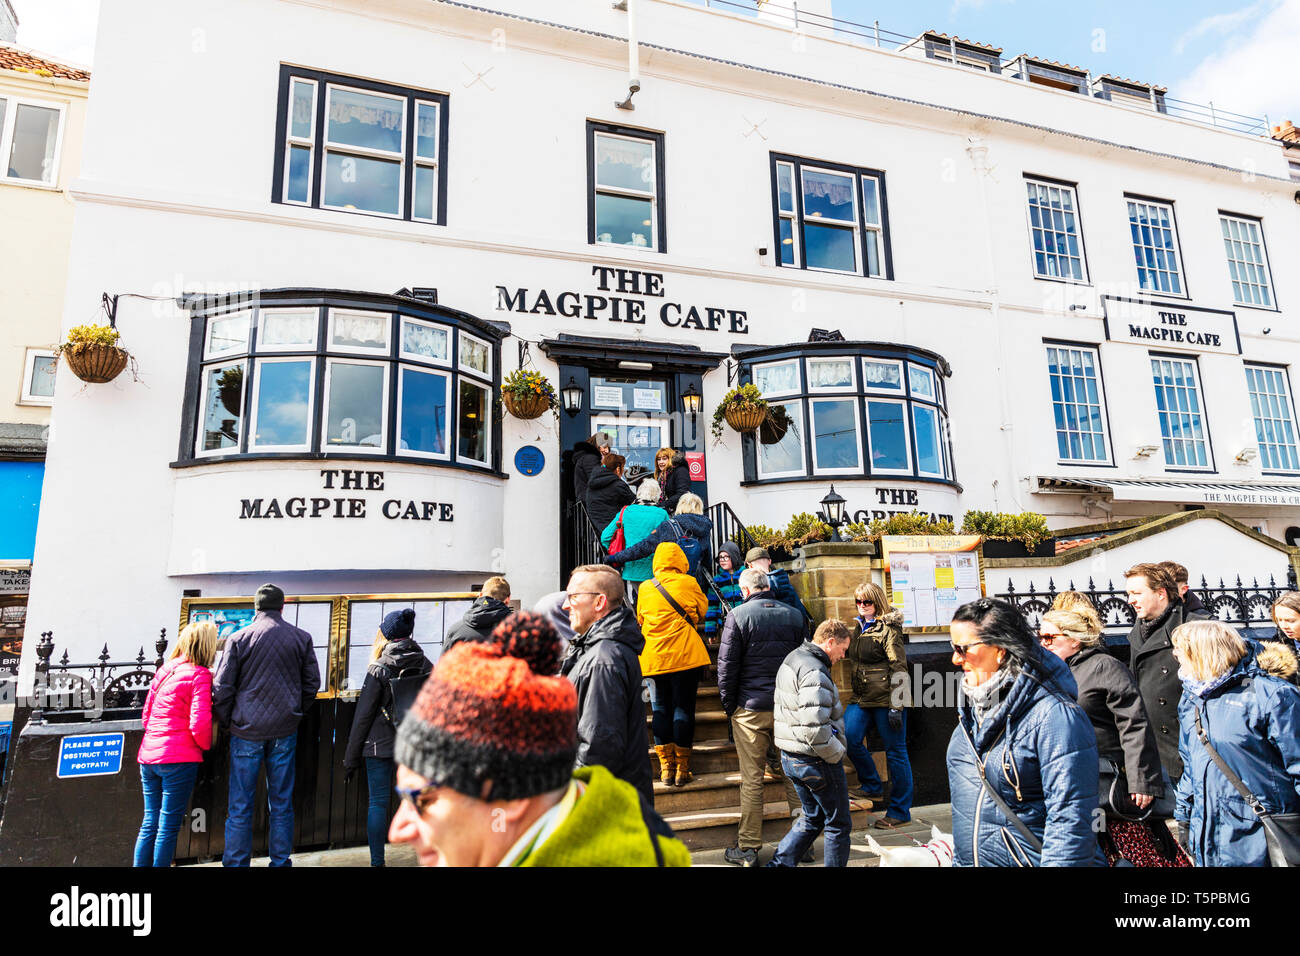 The Magpie Cafe Whitby, Whitby Yorkshire UK England, Magpie Cafe Whitby, Magpie fish and chips Whitby, Whitby Cafes, Whitby Cafe, queuing, queue, Stock Photo